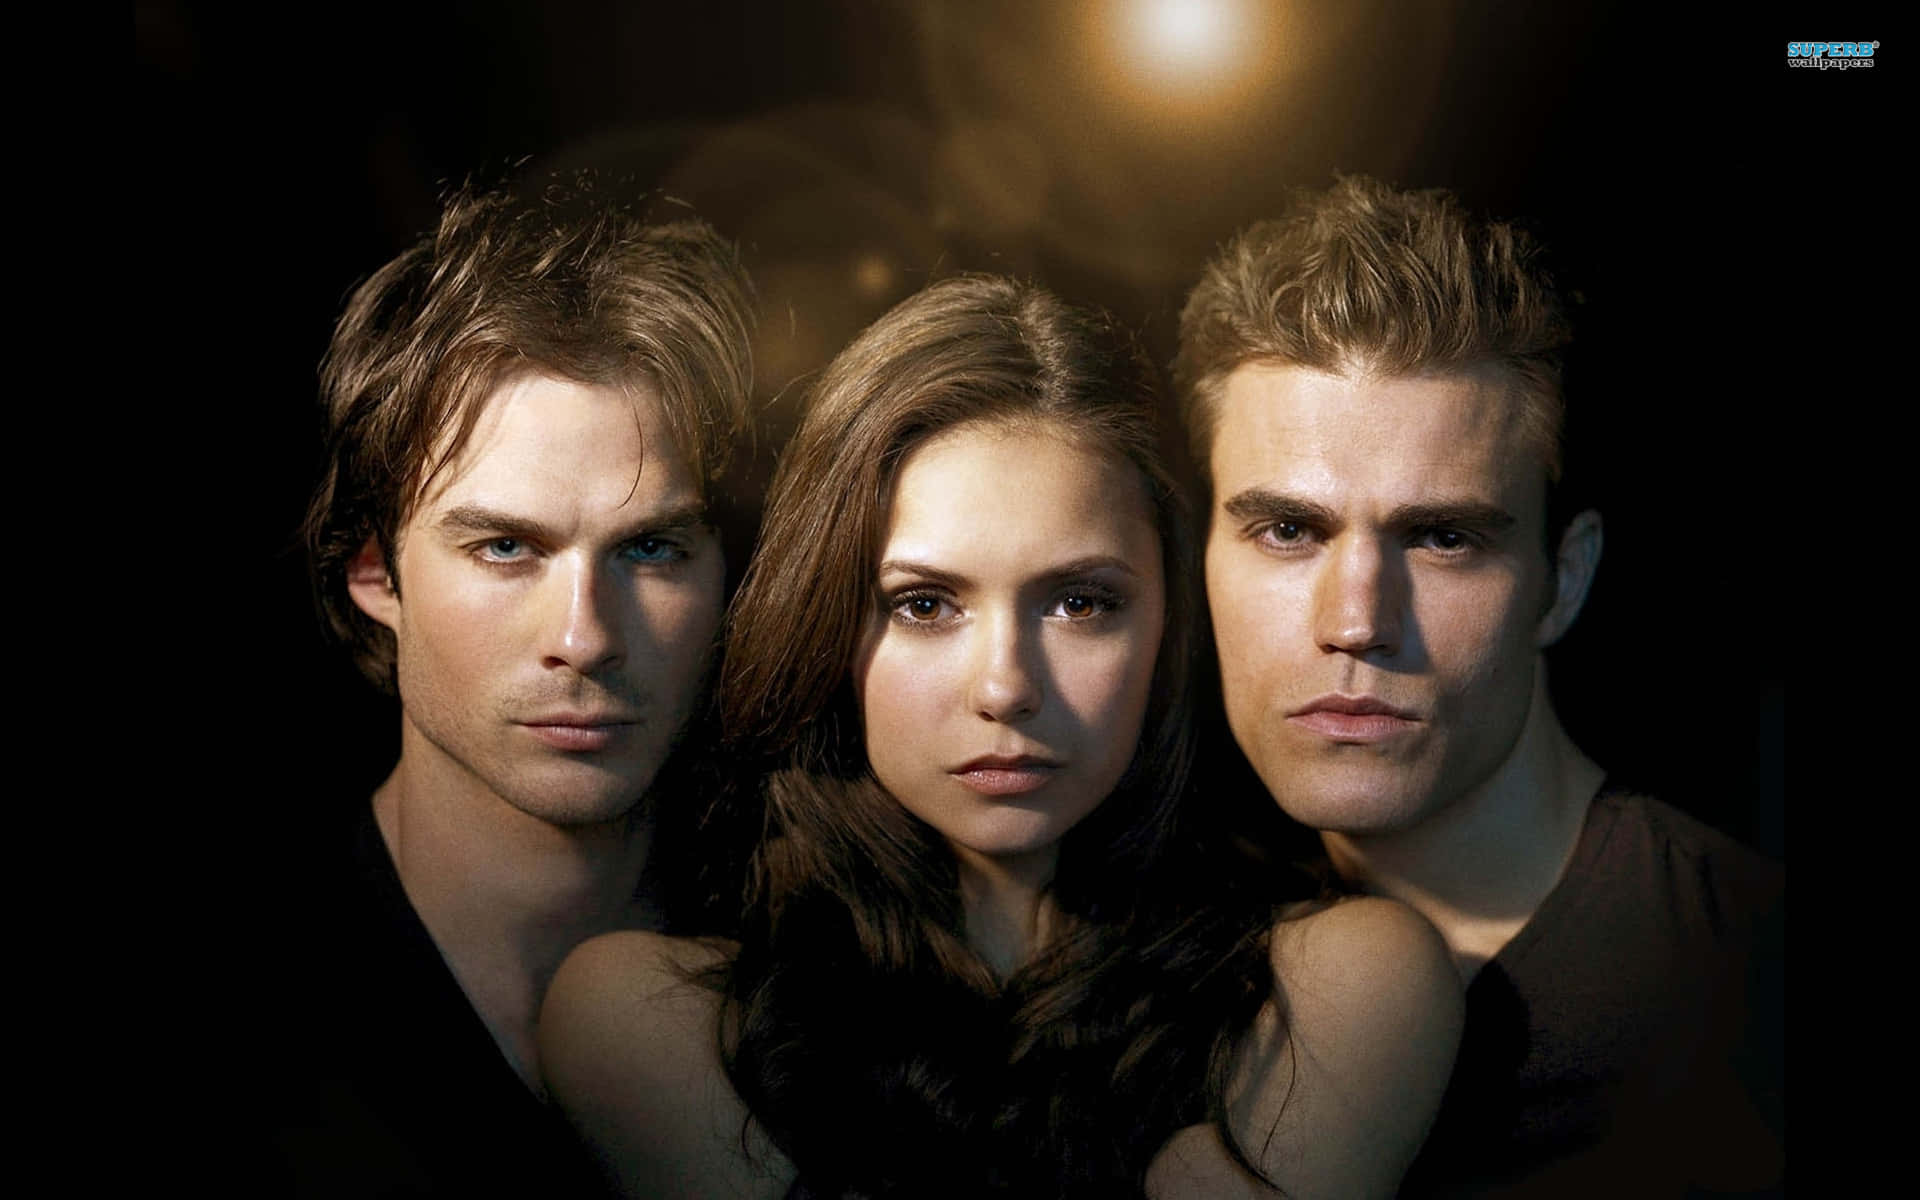 The Vampire Diaries in the Palm of Your Hand Wallpaper